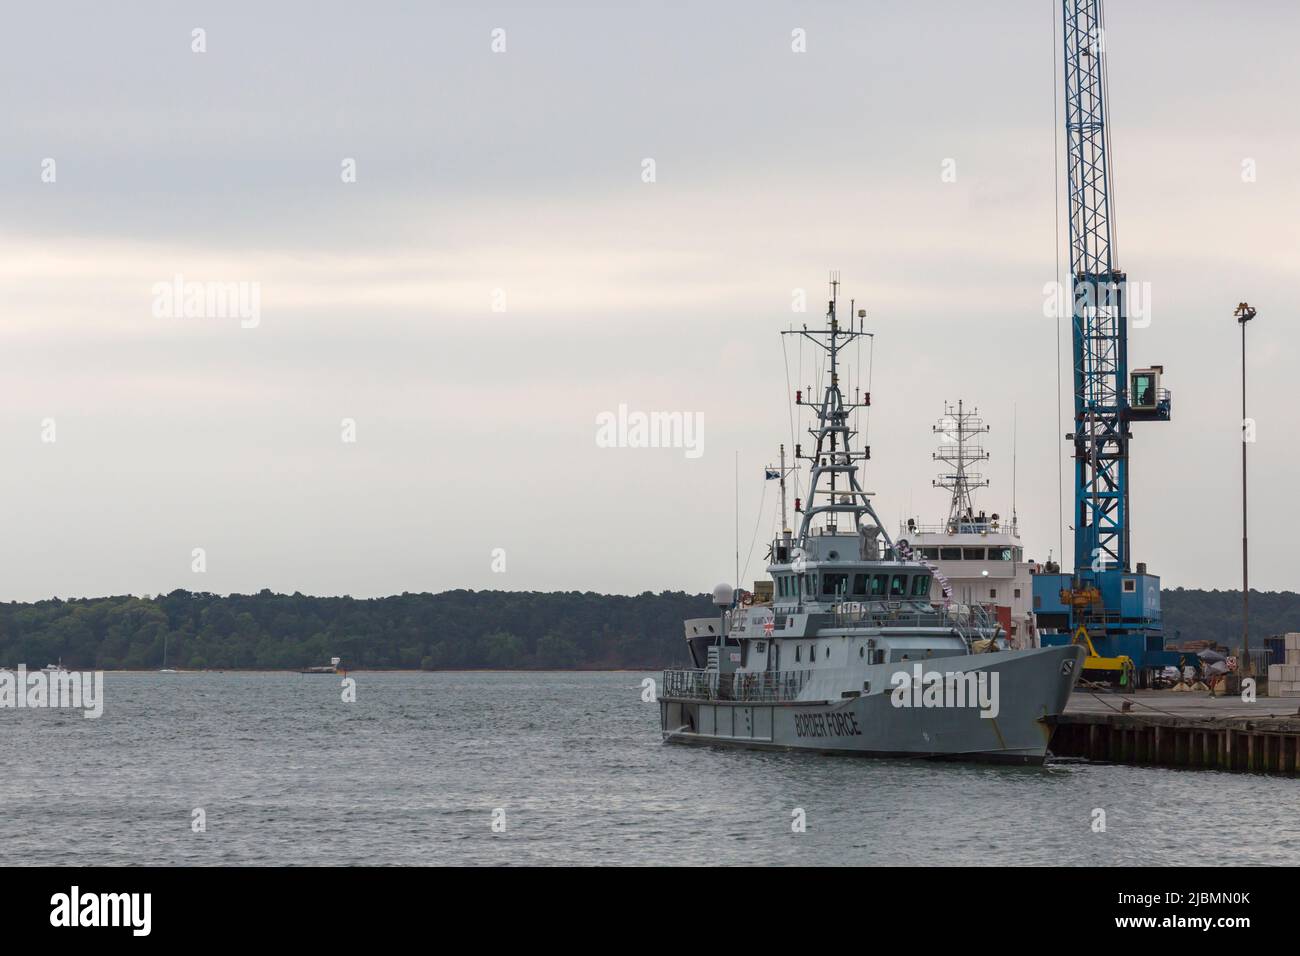 Valiant Border Force vessel moored at Poole Harbour, Poole, Dorset UK in June Stock Photo